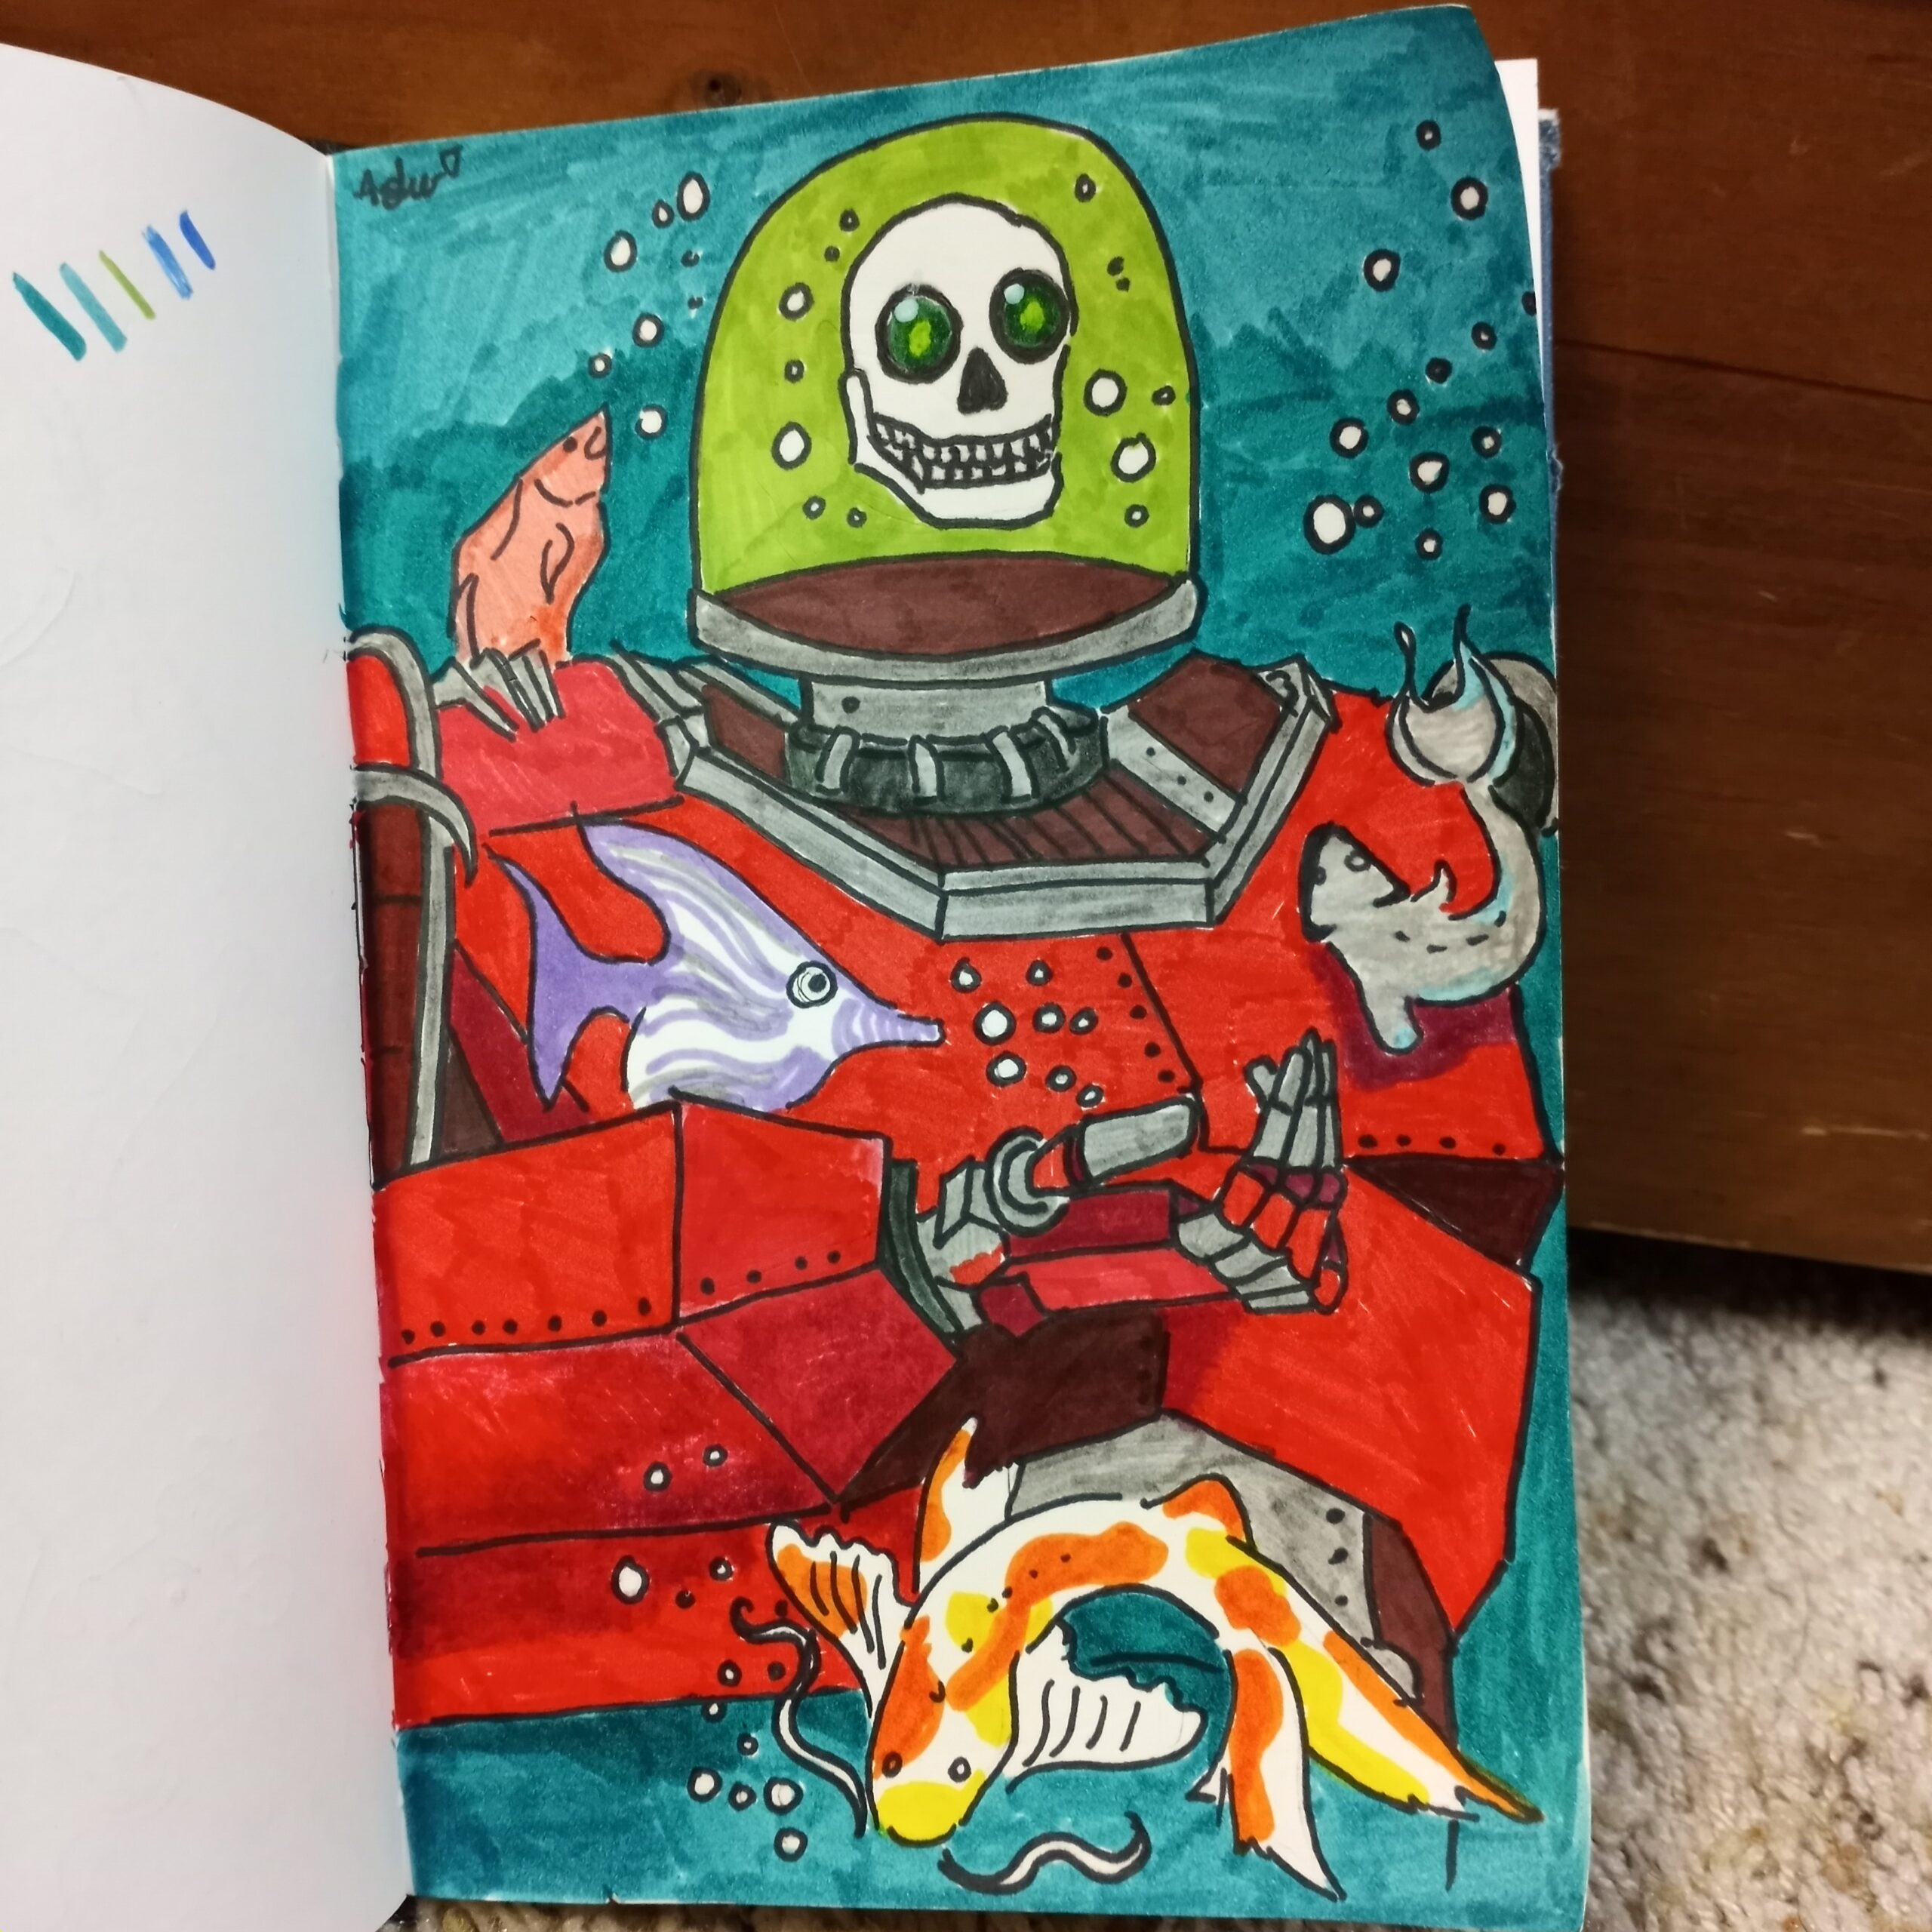 a teal background with fish, obscured by a large red metal robot. The body has articulated panels, and a hand reaching out. A glass dome on top of its head is filled with lime green, and the skull inside has glowing green eyes. the robot is interacting with the fish.